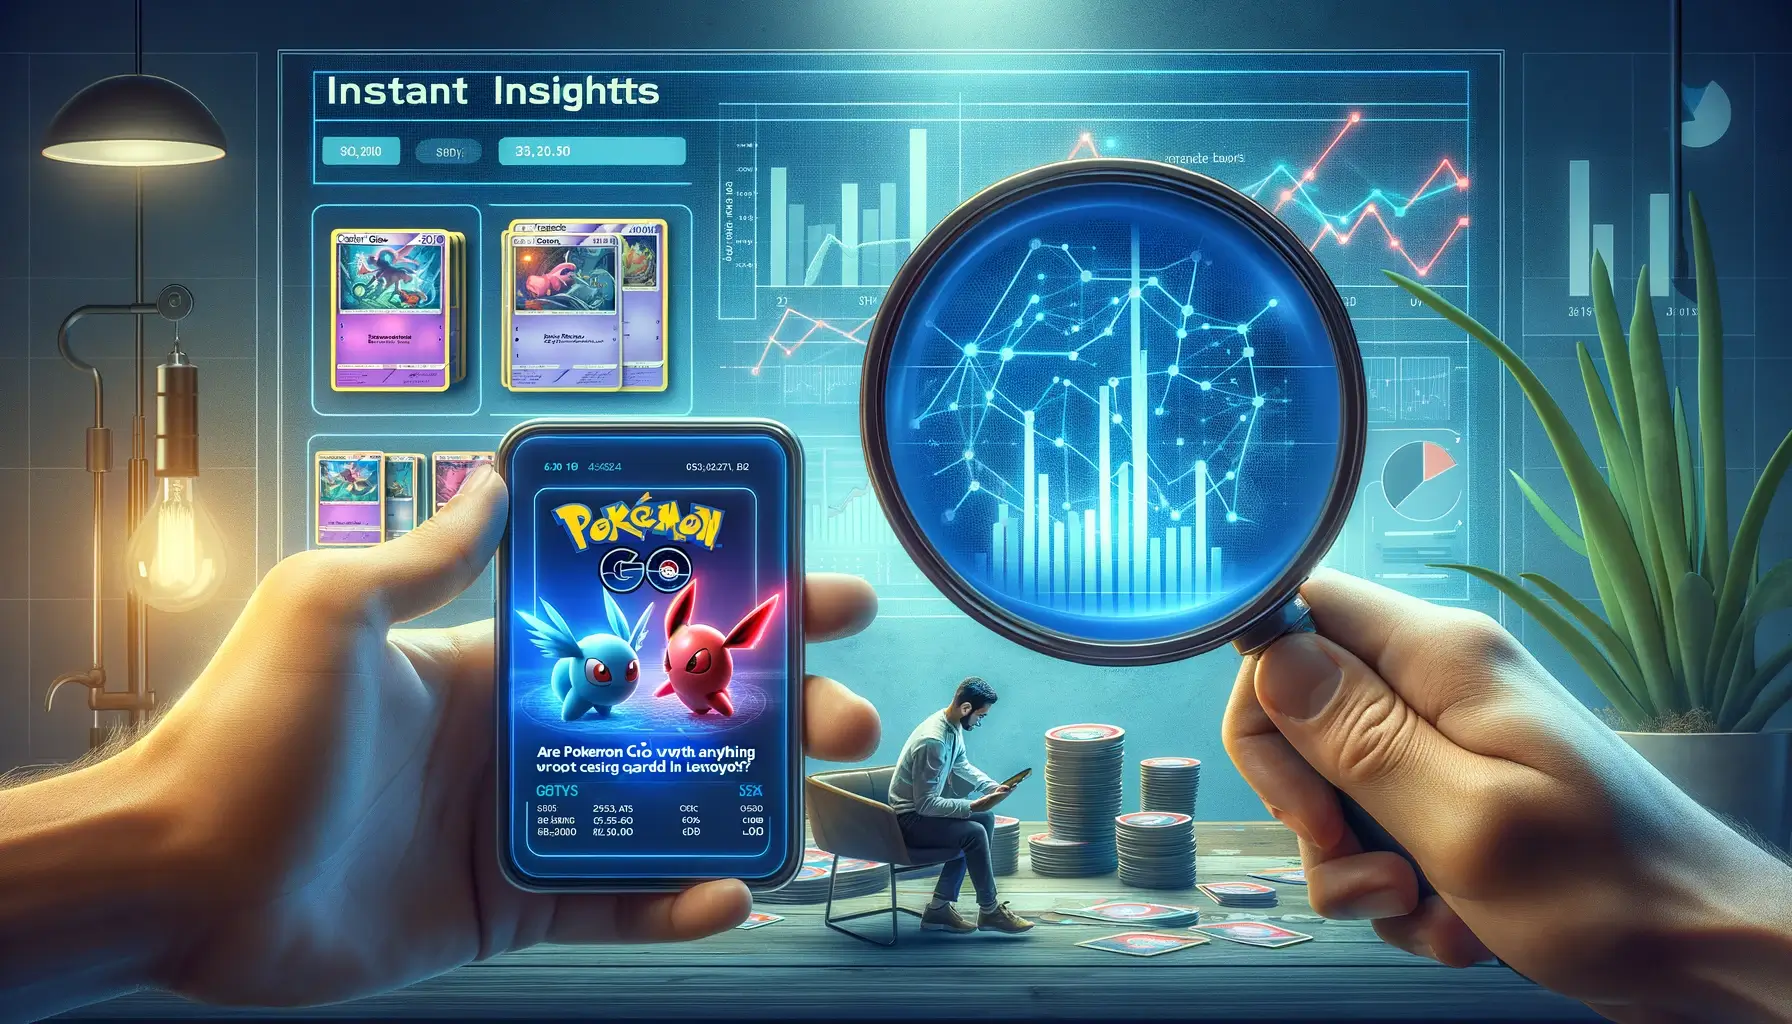 Are Pokemon GO Cards Worth Anything title image